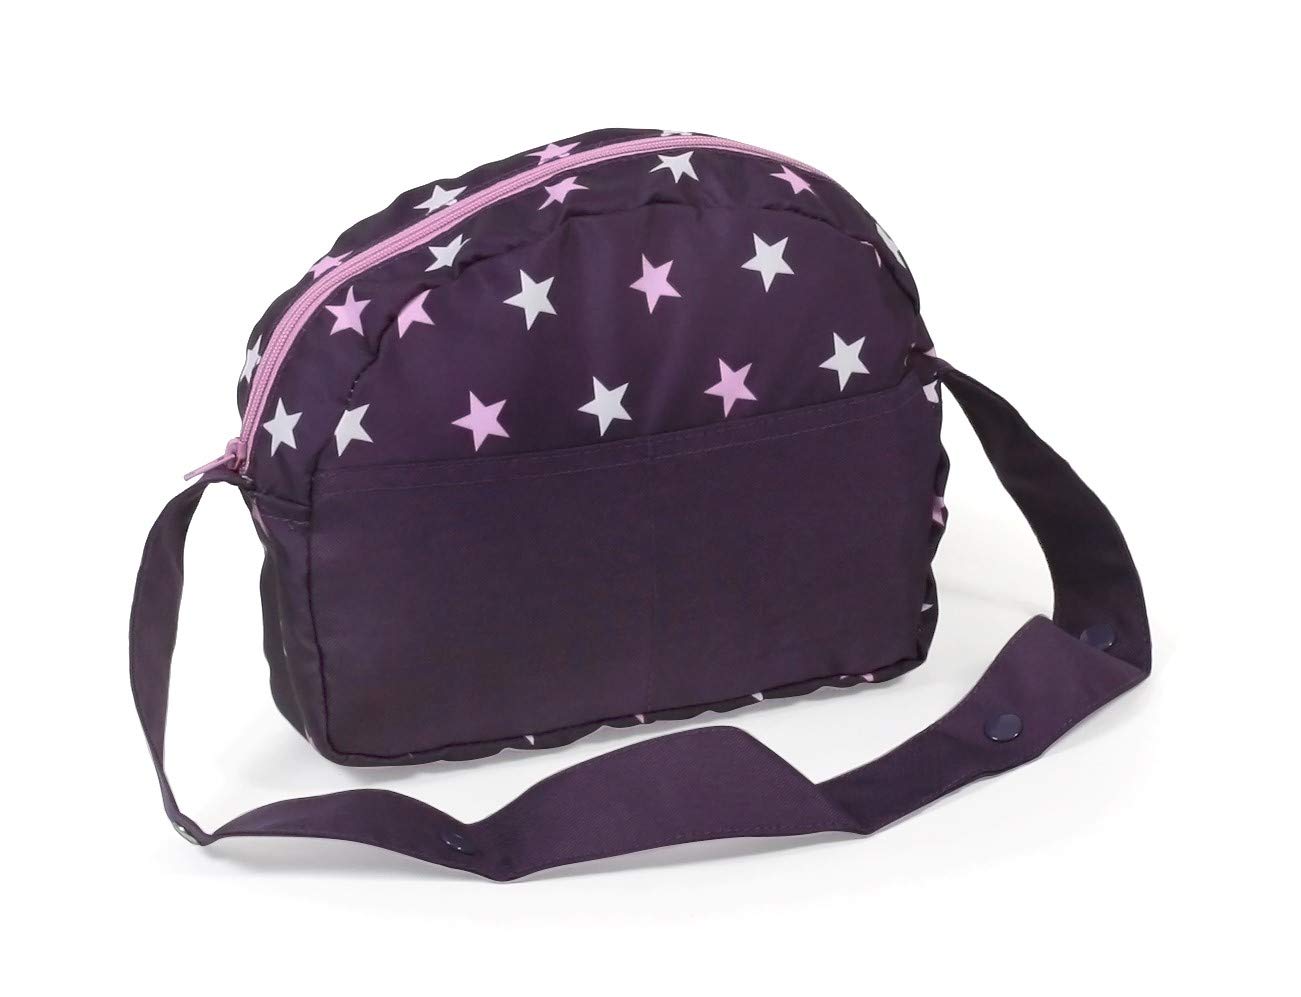 Bayer Chic 2000 - Doll Changing Bag, Doll Changing Bag, Doll Accessories, Doll Bag, Stars Purple